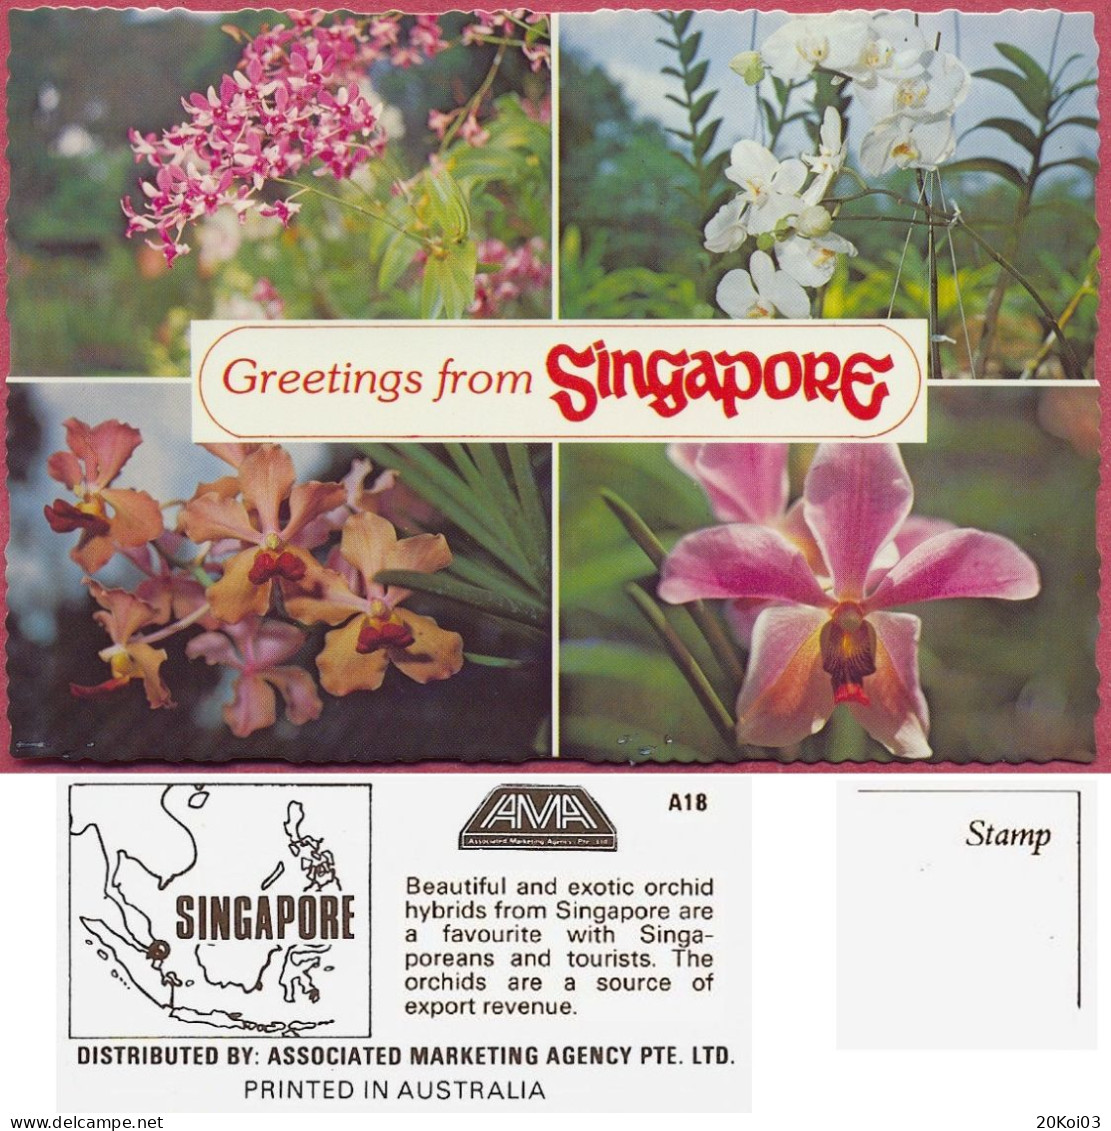 Singapore Greetings From, Orchid Hybrids +/-1975's A18 AMA , Vintage UNC_cpc - Singapore